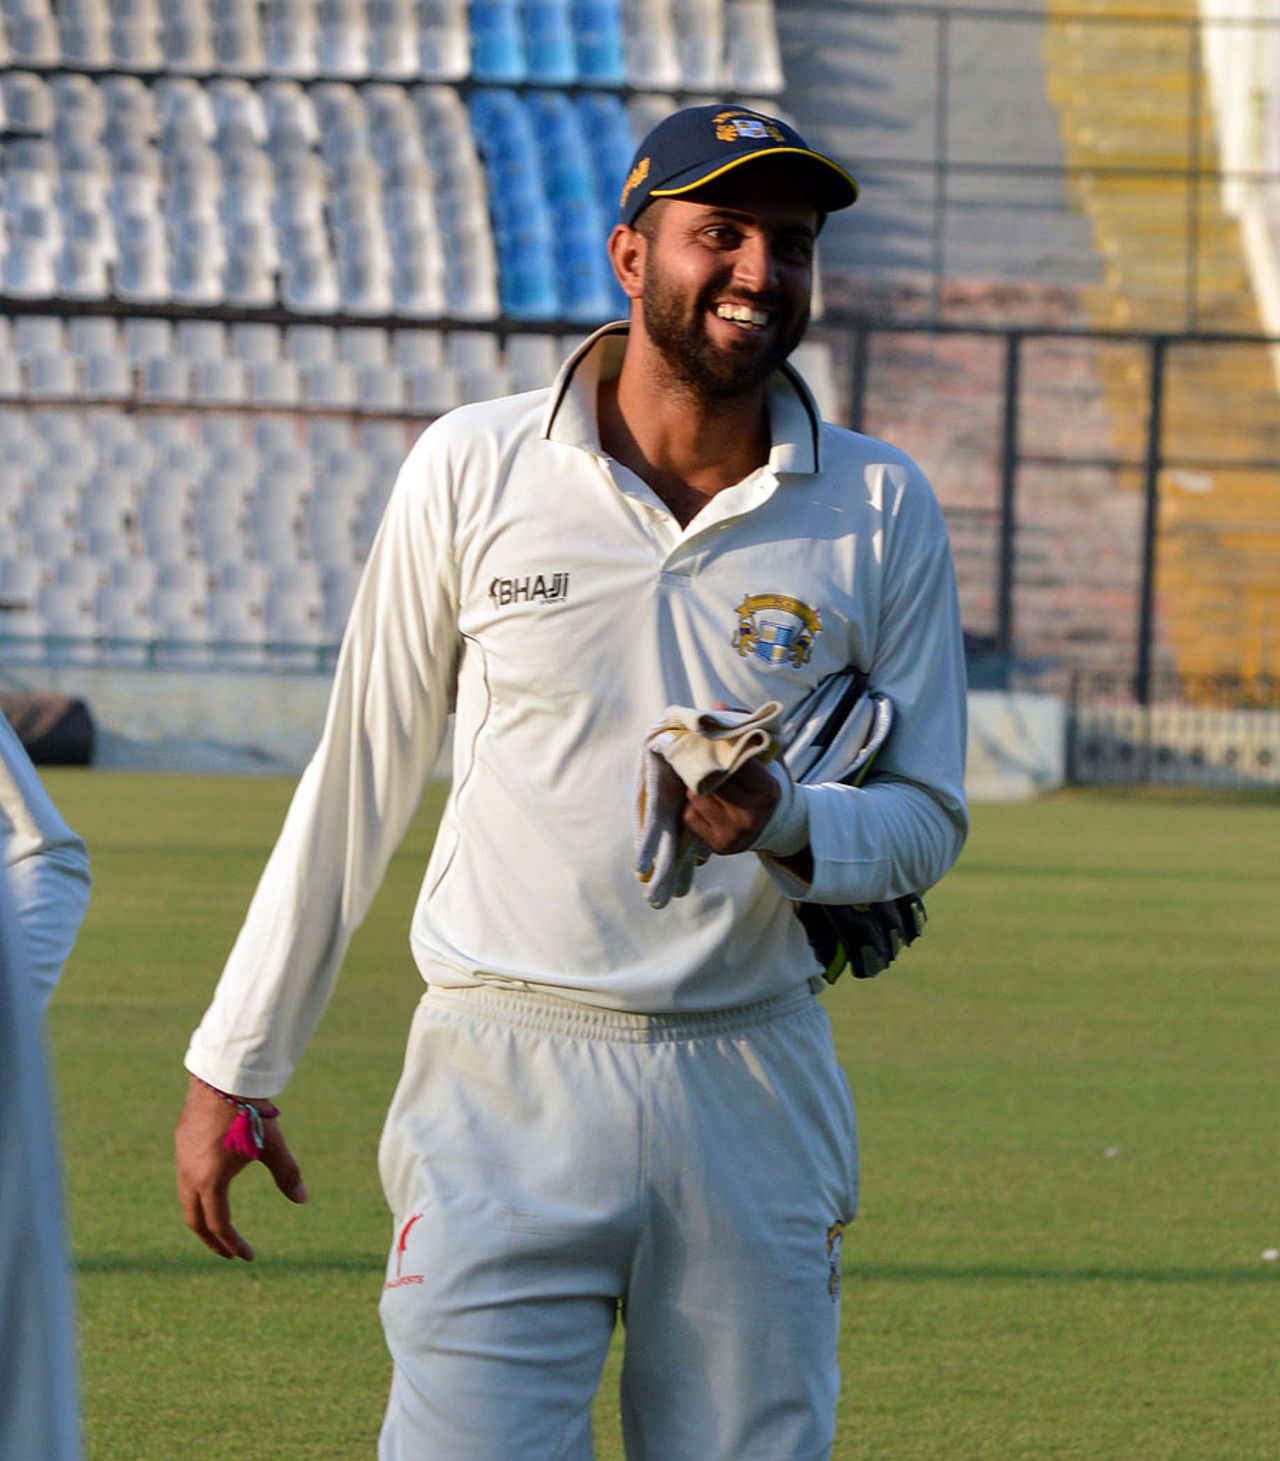 Gitansh Khera finished with 102 not out as Punjab piled up 604 for 5 declared, Punjab v Railways, Ranji Trophy 2015-16, Group B, Mohali, 2nd day, October 2, 2015